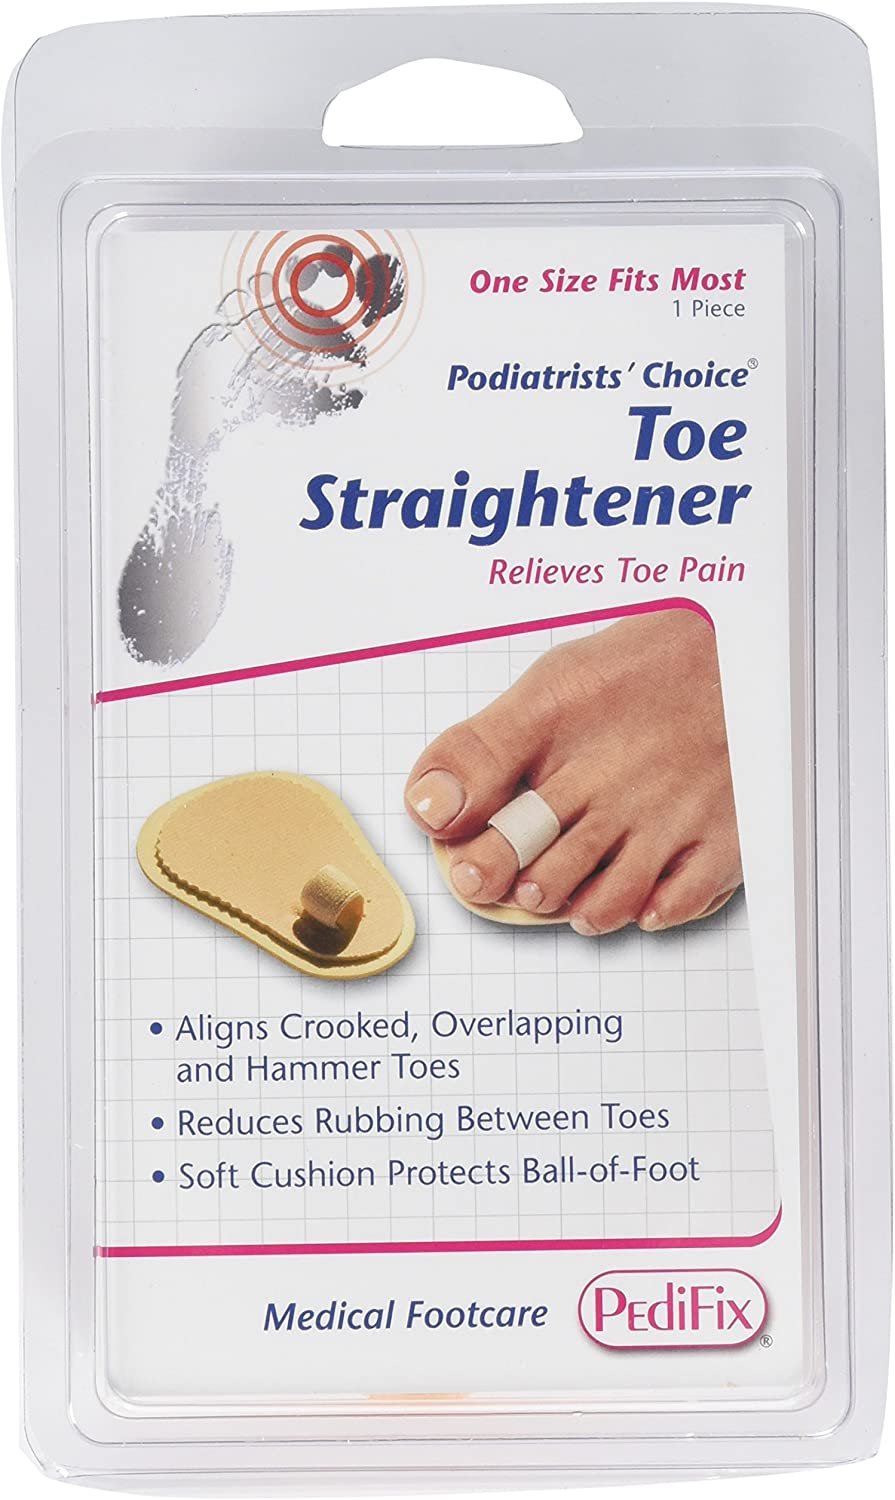 PediFix Podiatrists' Choice Toe Straightener 3 Pack - One Size Fits Most - image 1 of 2